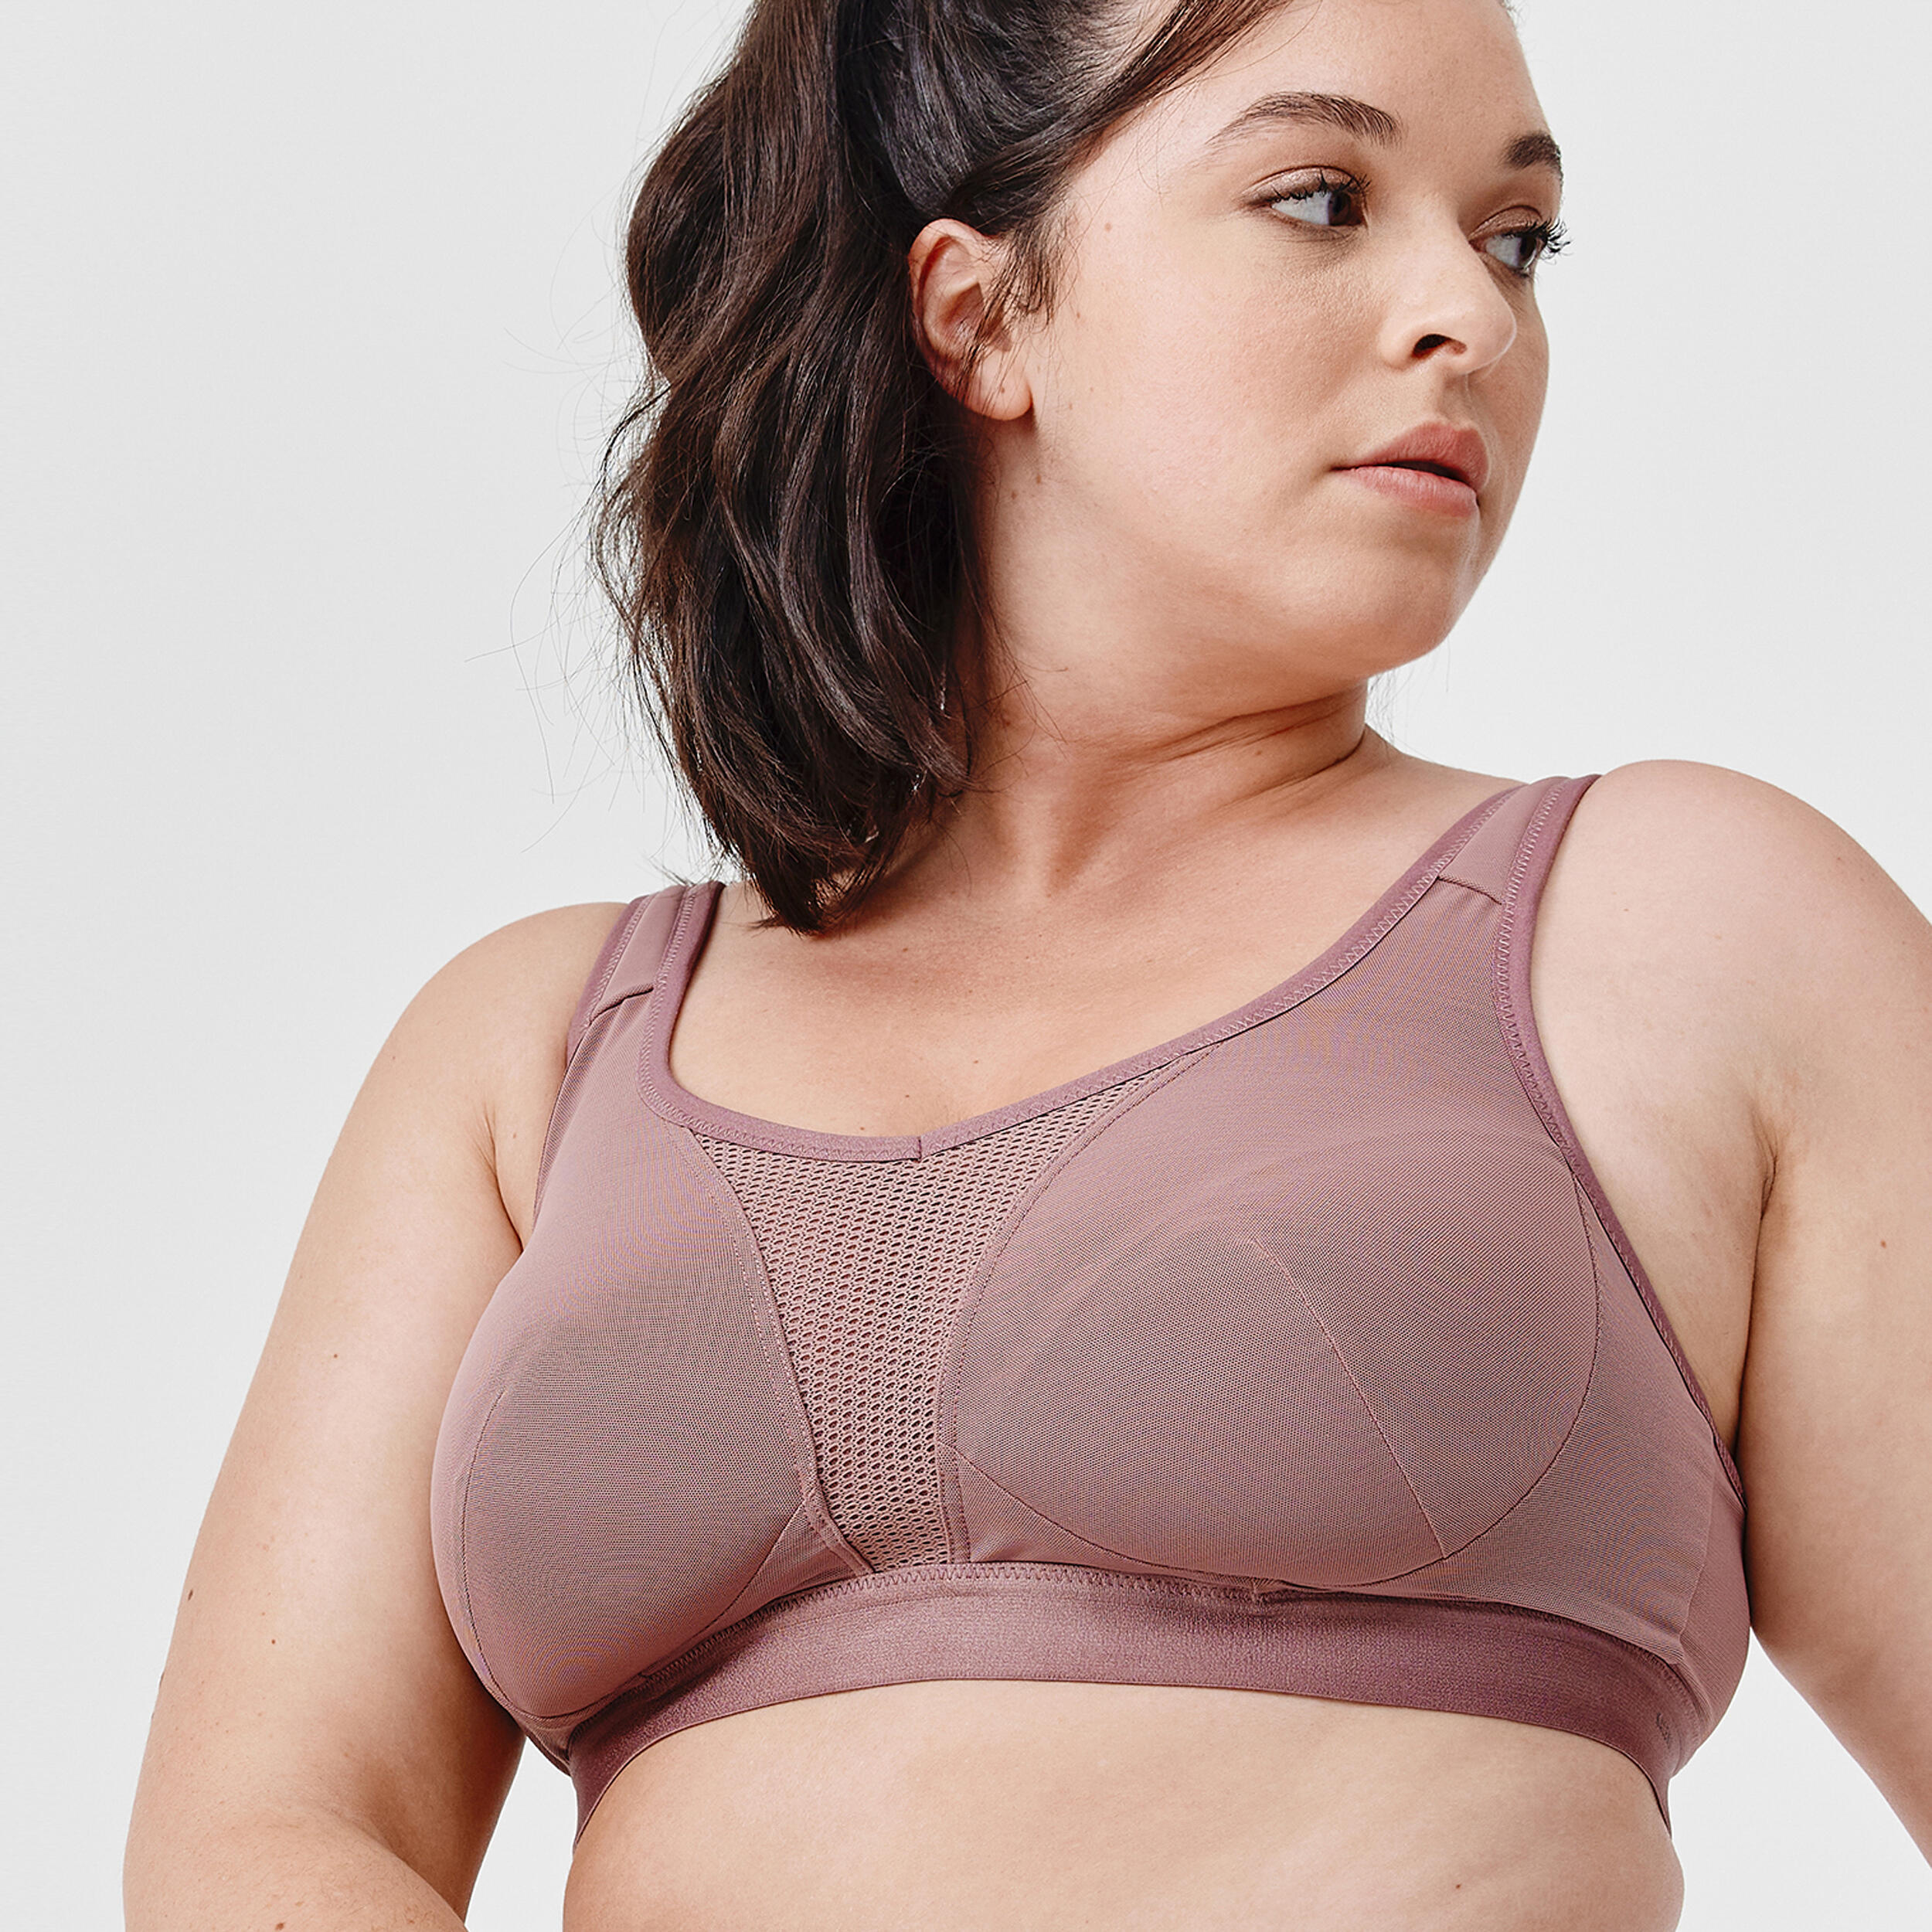 Women's High Support Bra with Crossed Straps - Taupe Pink 8/12